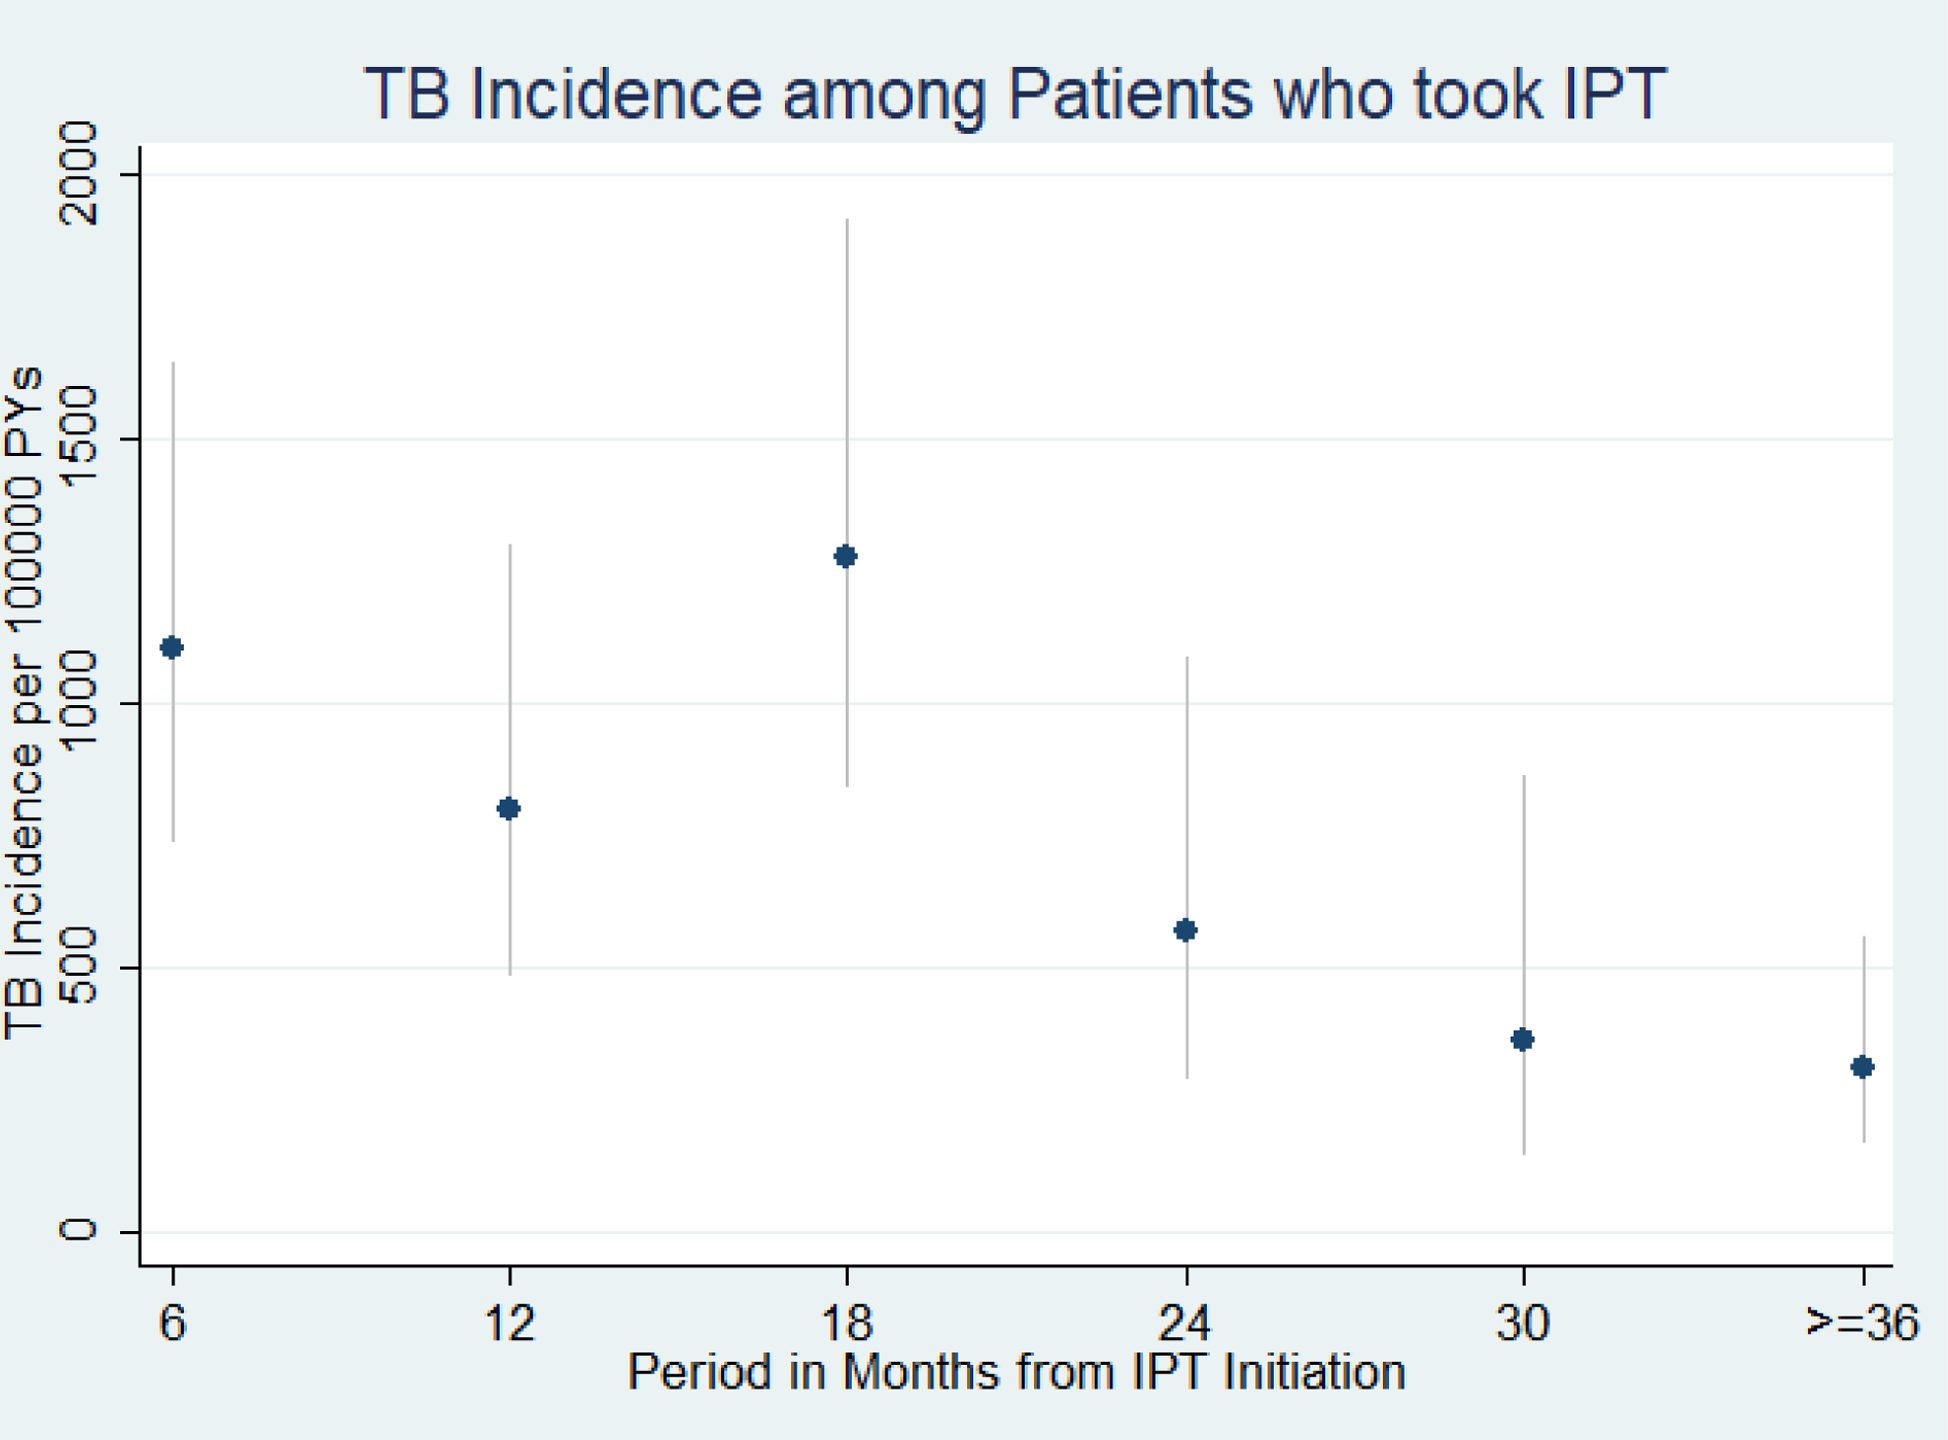 Figure 1: TB Incidence among patients who took isoniazid preventive therapy in Ethiopia, September 2005 to October 2013 (n = 4,484). Source: PLOS ONE. https://doi.org/10.1371/journal.pone.0211688